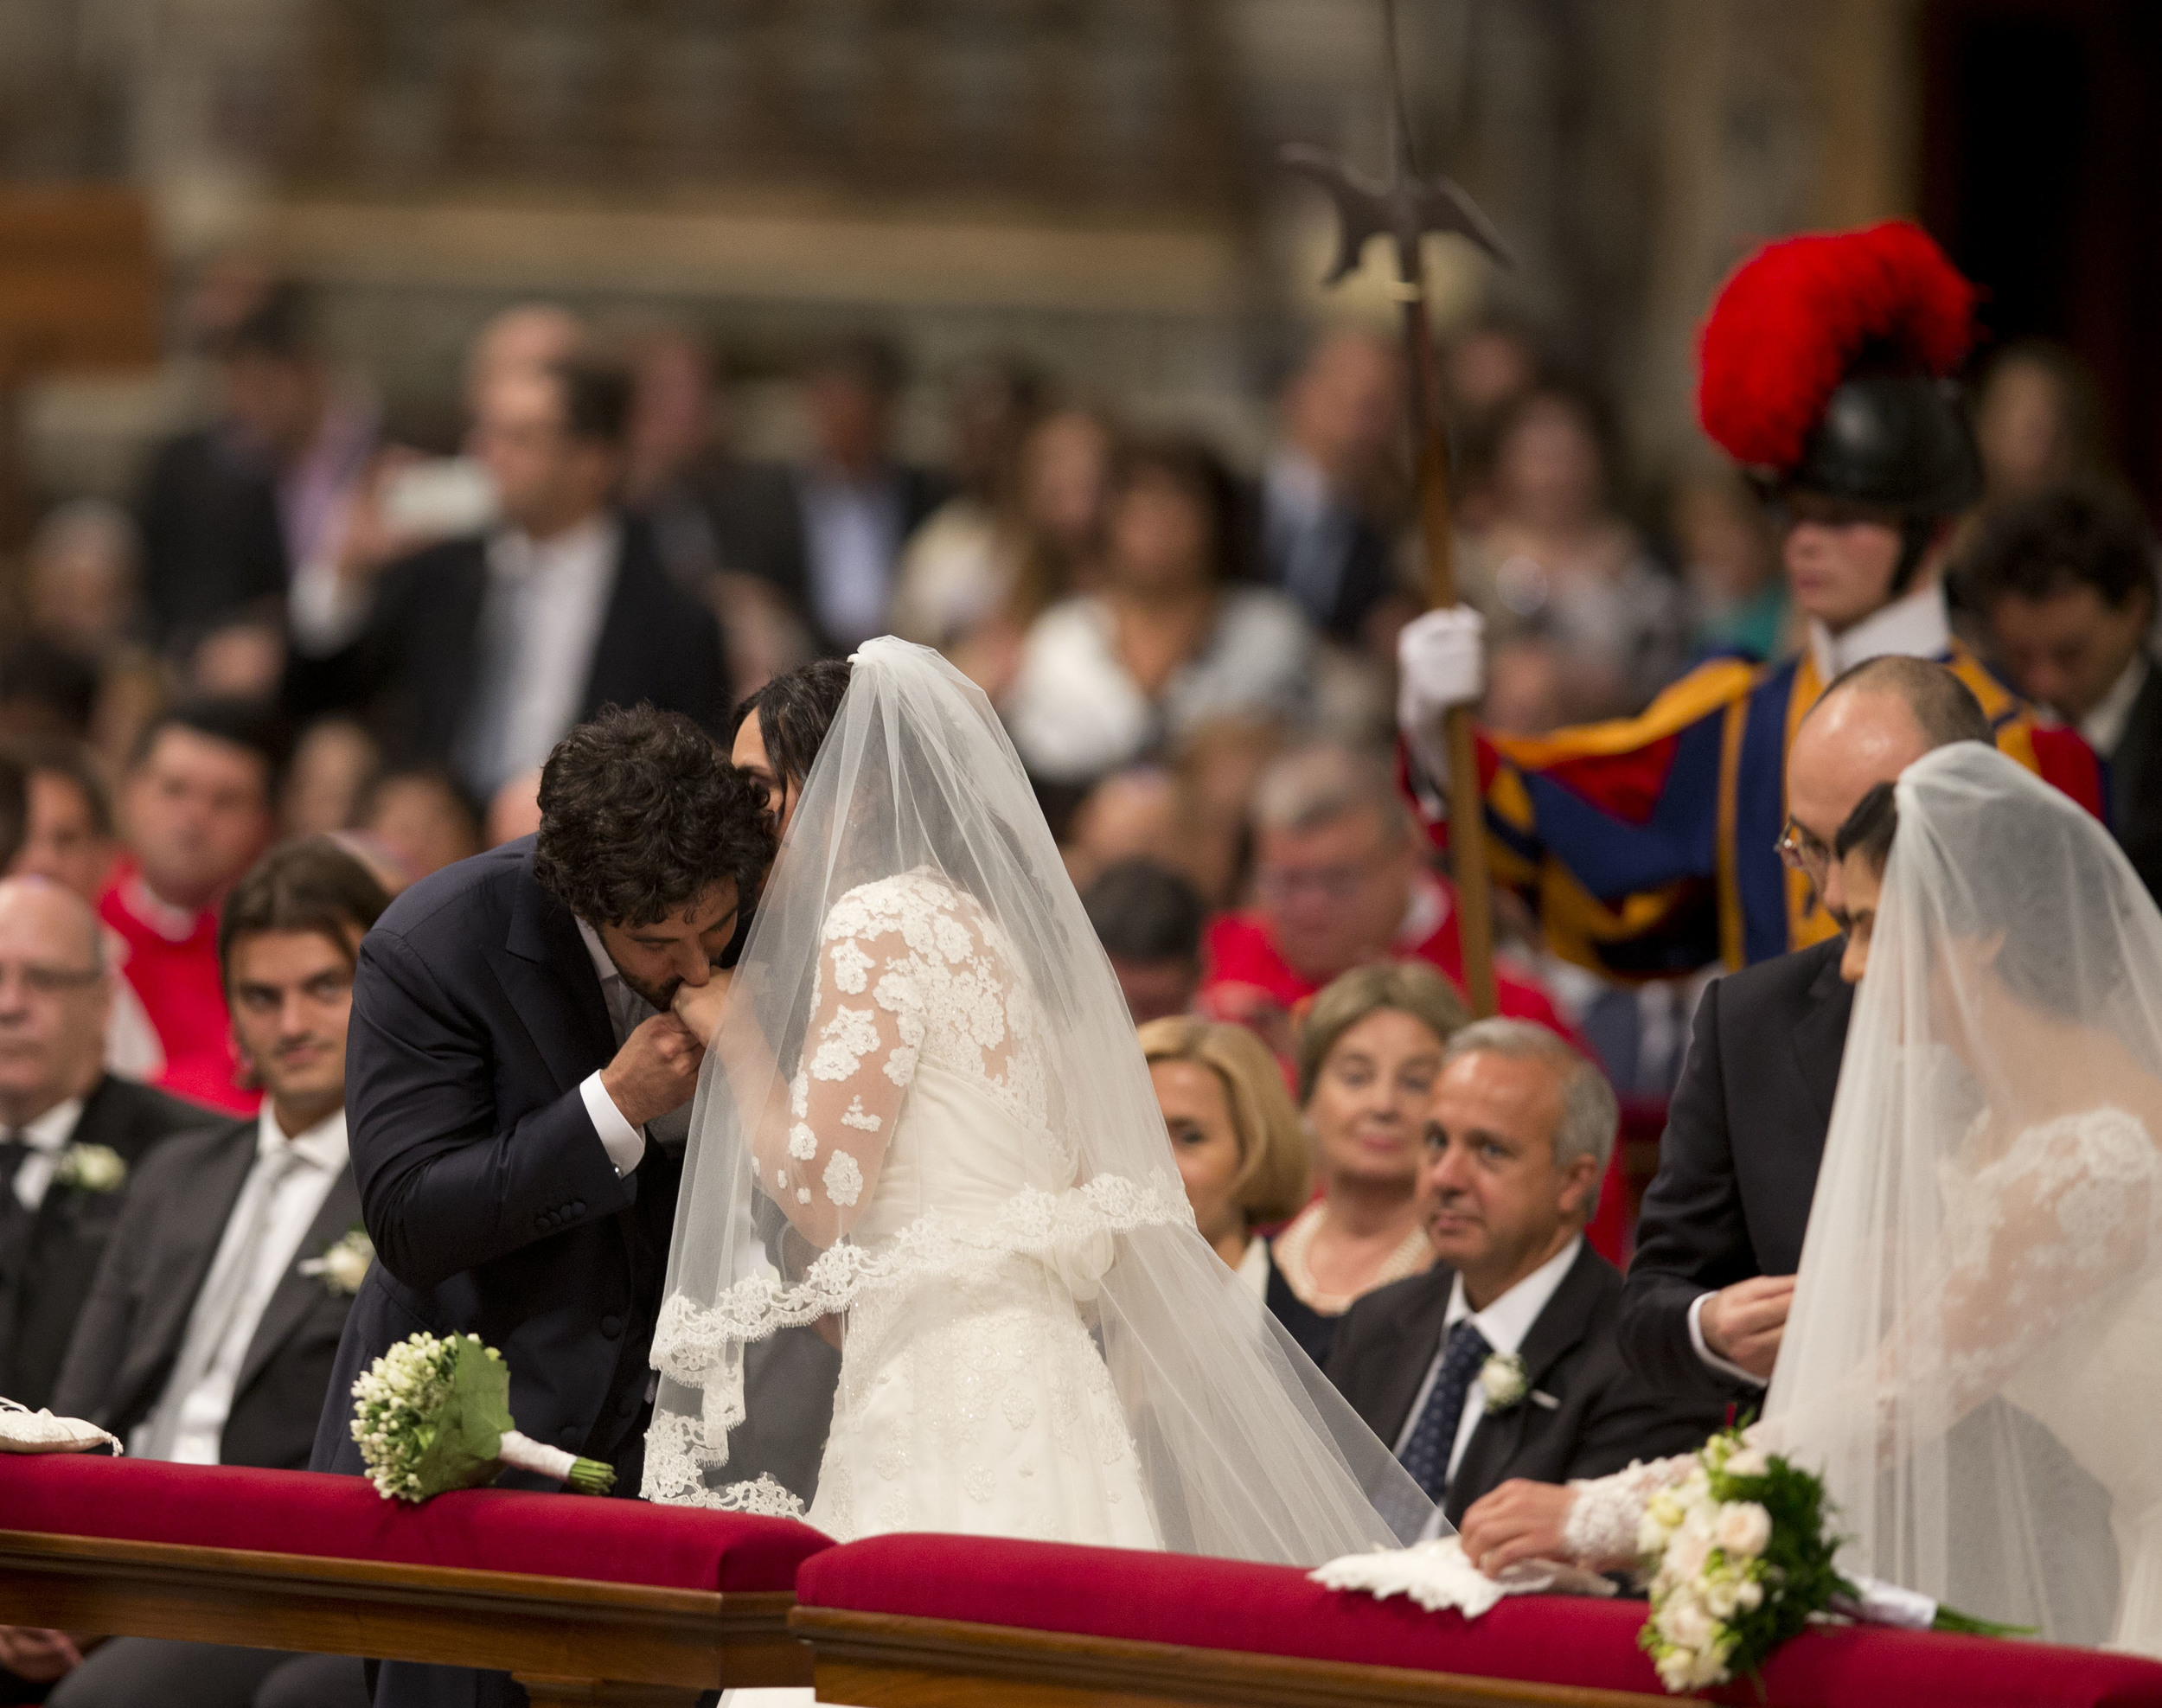 Pope Francis marries 20 couples in St Peter's - Catholicireland